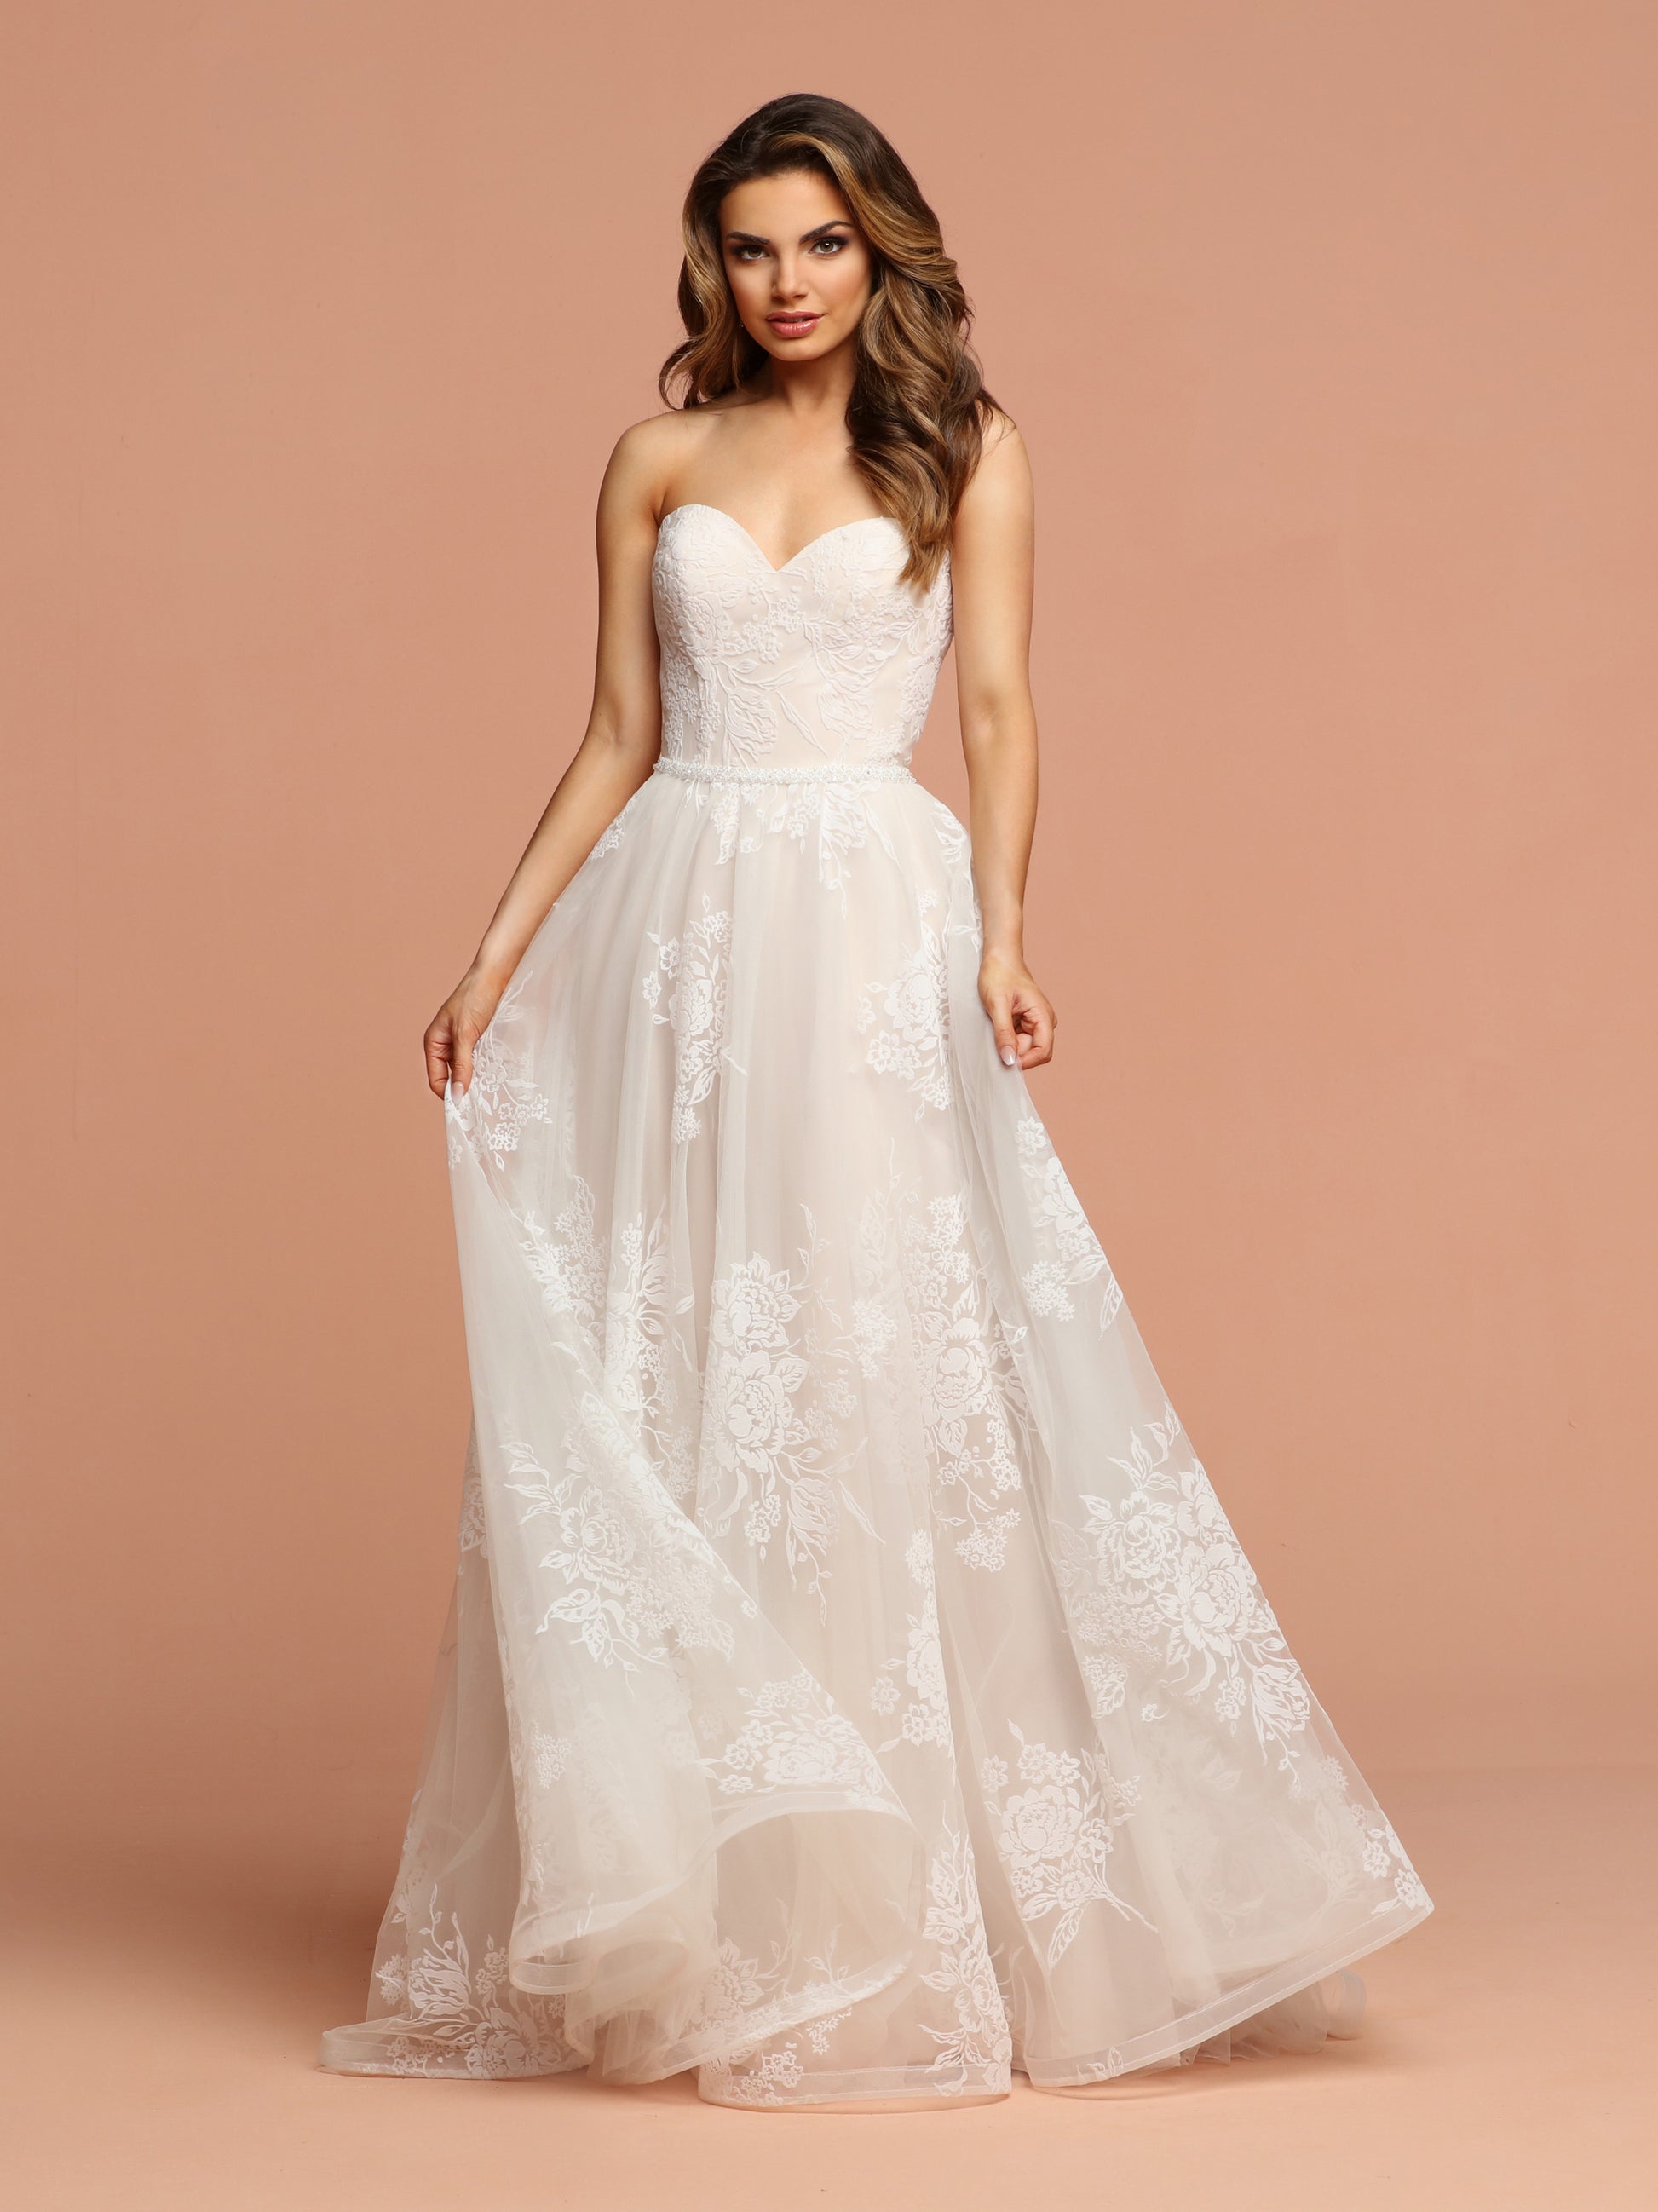 Davinci Bridal 50599 This flowing tulle gown has soft velvet like flowers throughout.  The sweetheart strapless bodice has a beaded belt at the waist extending into a lace up back. Available for 1-2 Week Delivery!!!  Available Sizes: 2,4,6,8,10,12,14,16,18,20  Available Colors: Ivory/Blush, Ivory/Ivory